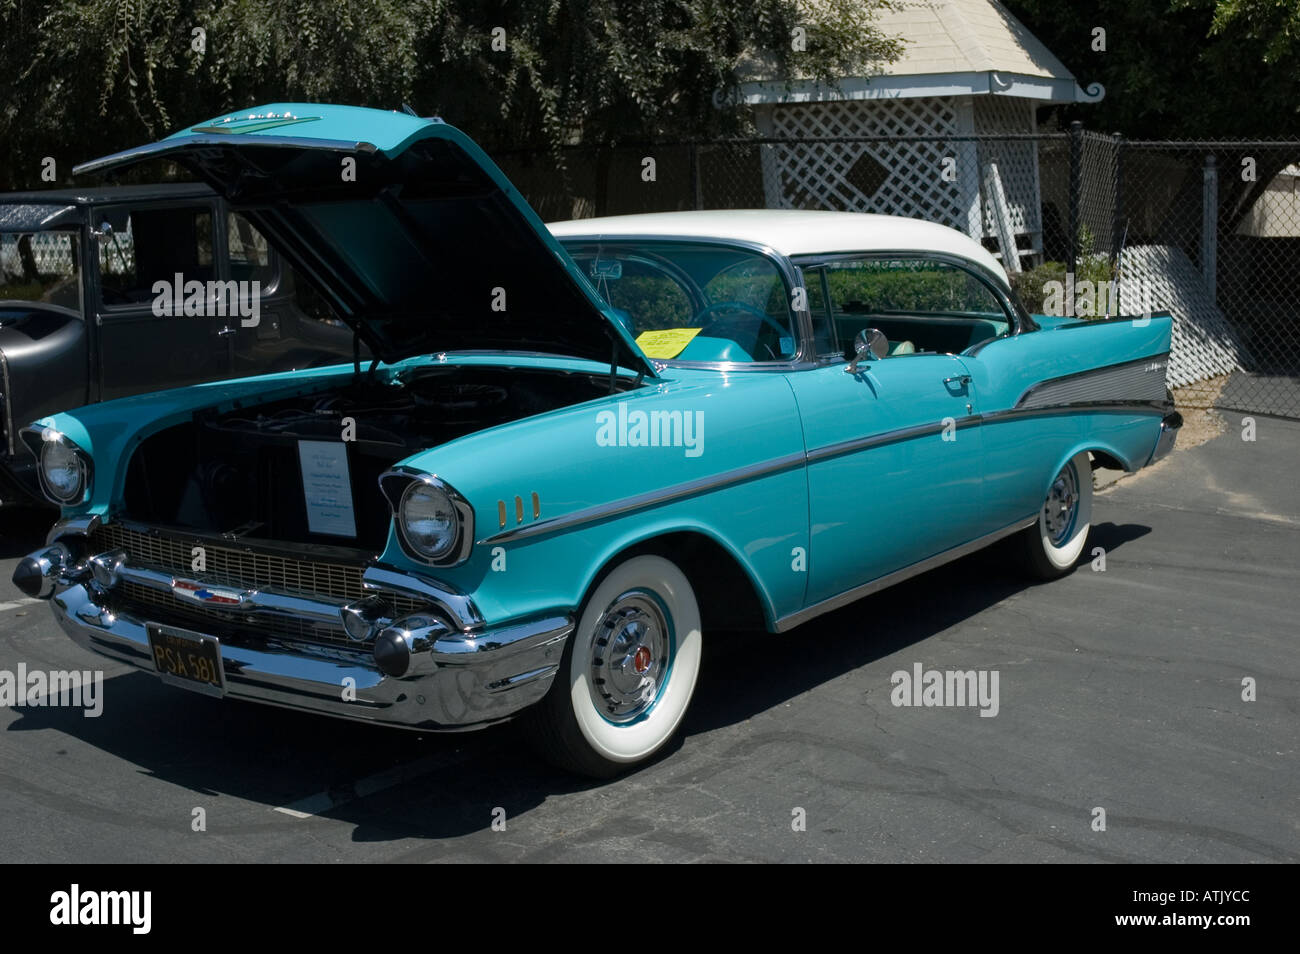 Los Angeles California car show antique customized 1957 57 Chevrolet Bel Air Chevy Stock Photo